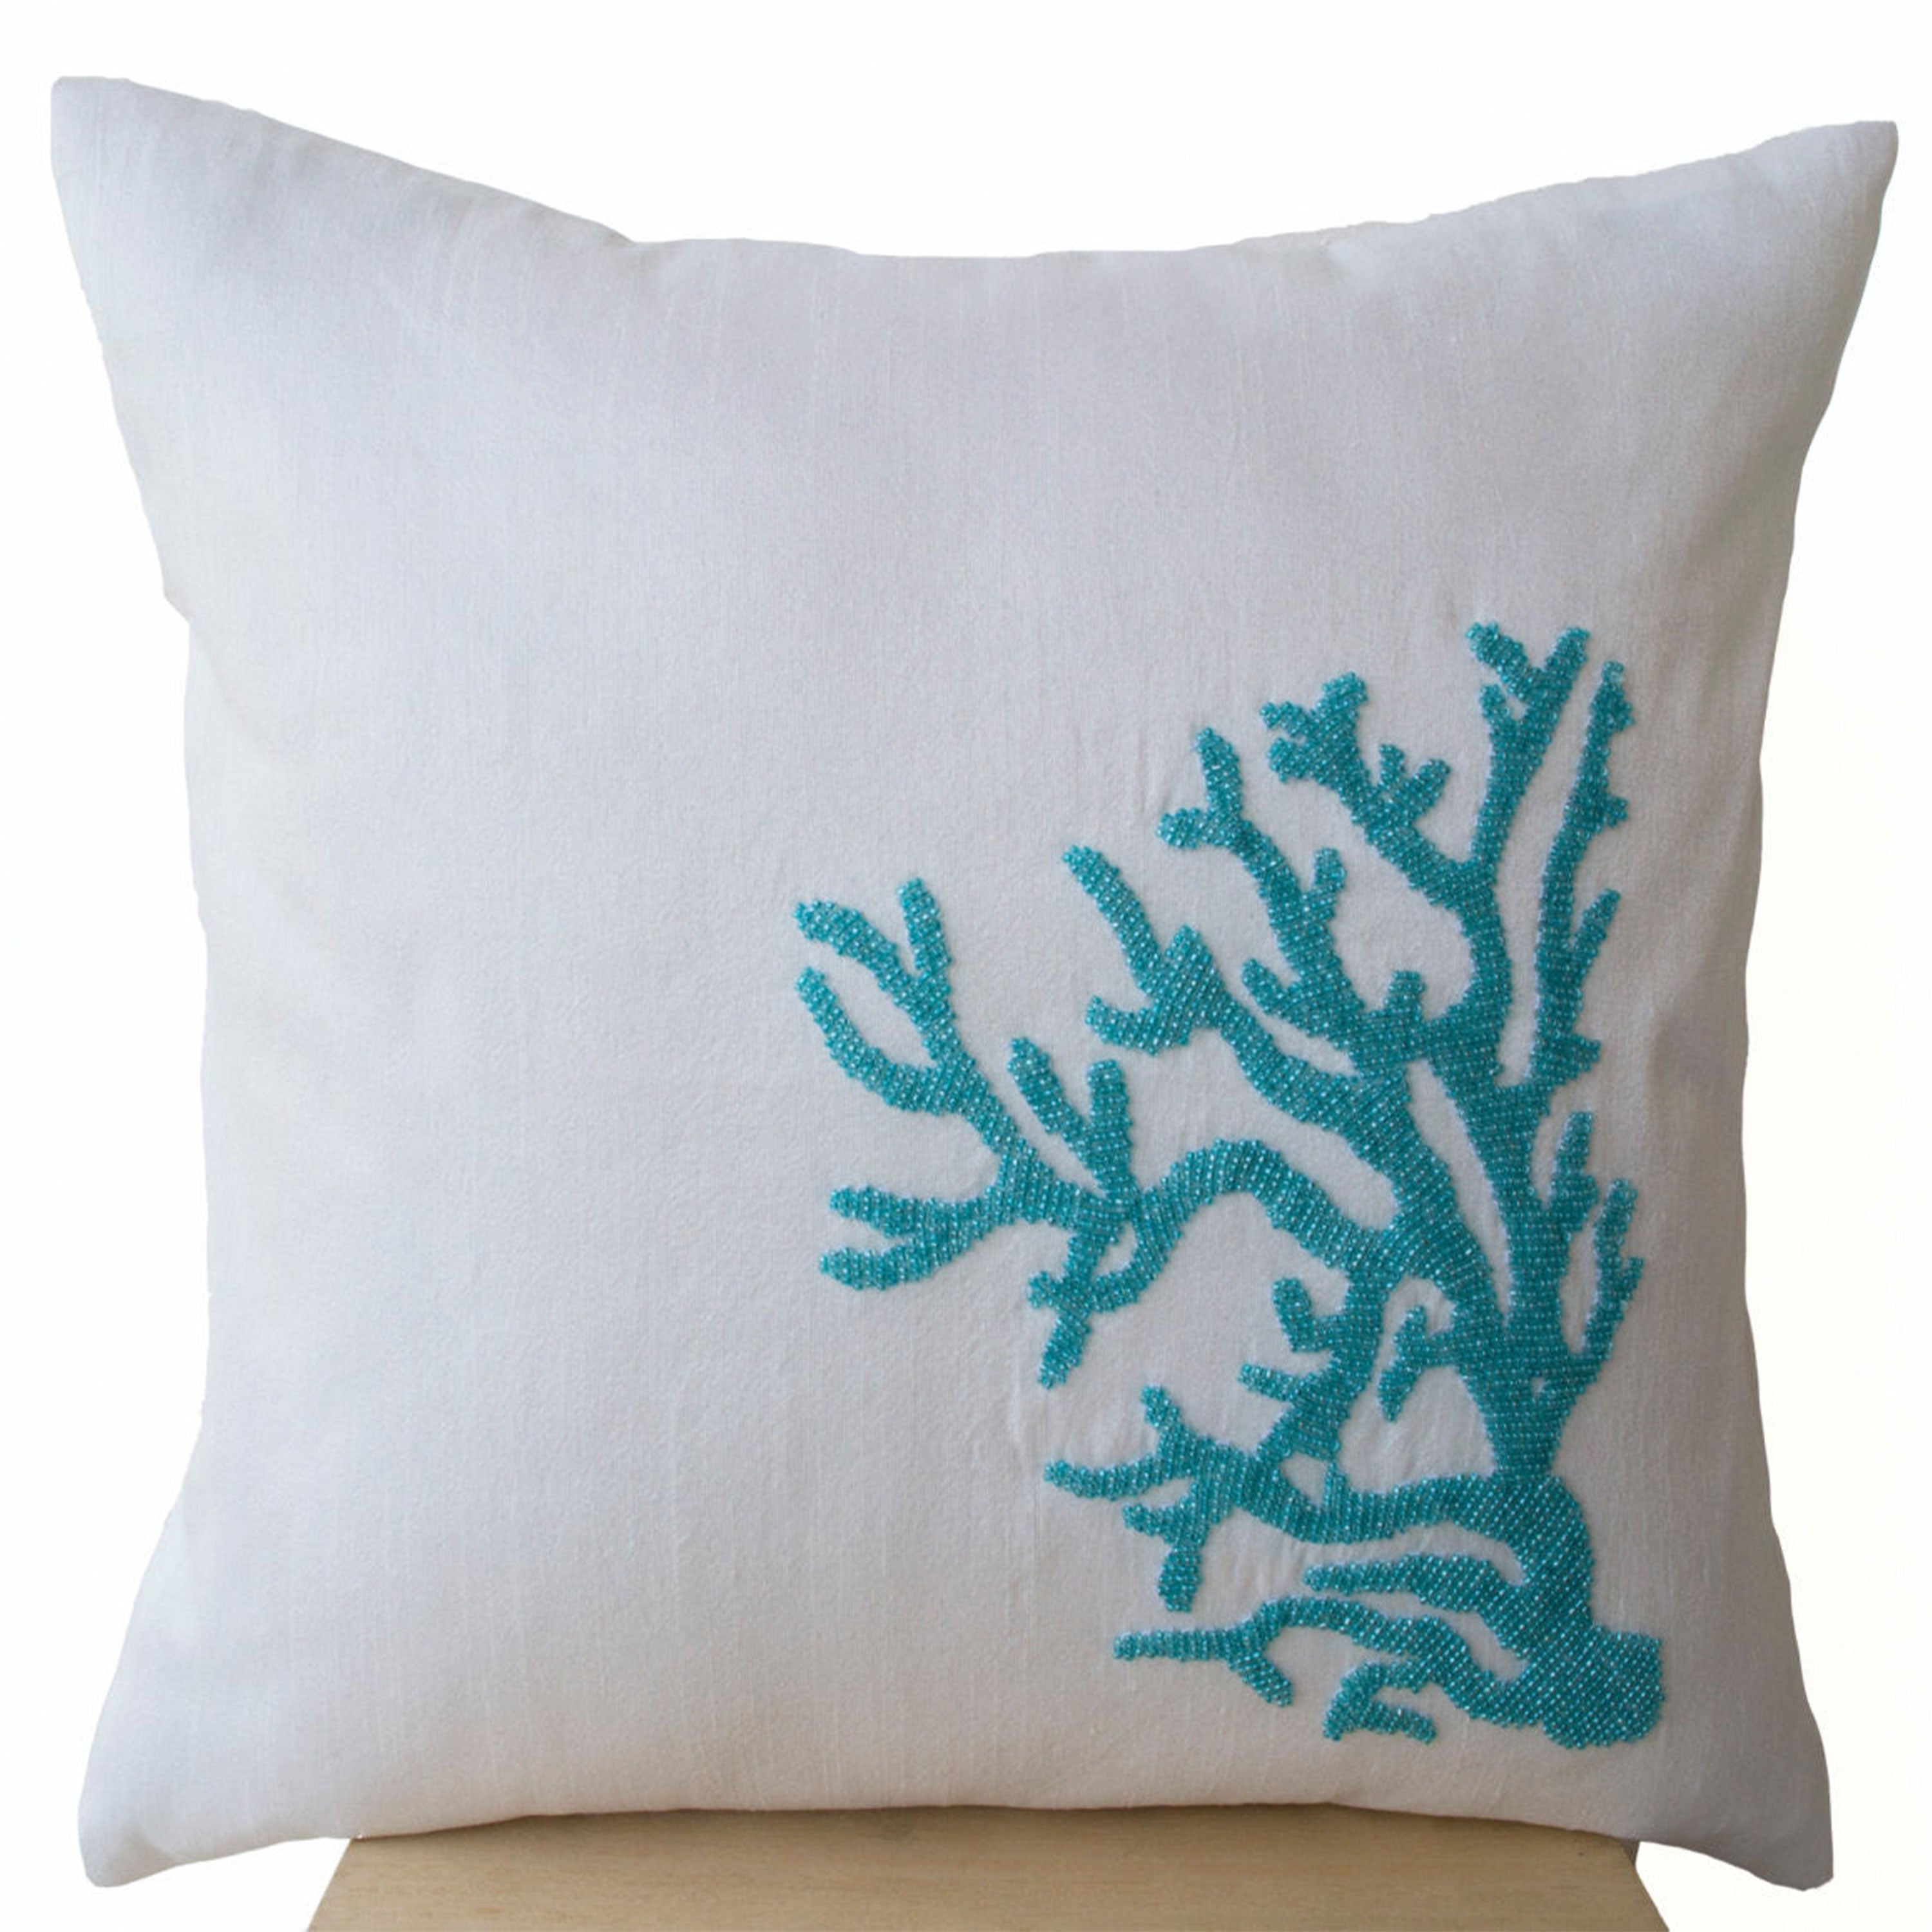 Decorative Pillow Cover Embroidered With Turquoise Blue Coral On White Silk